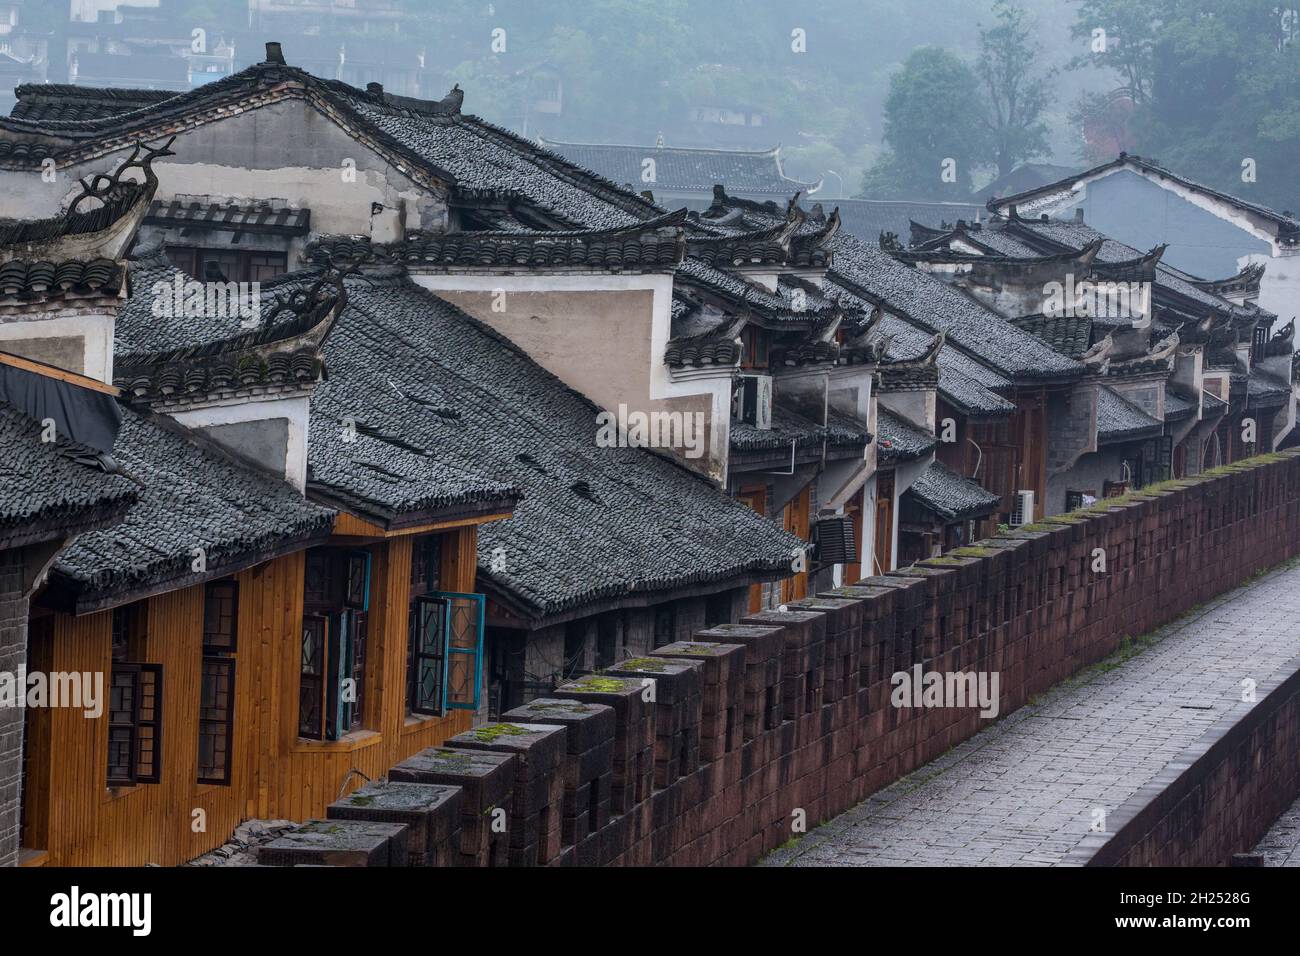 A foggy morning view of the ancient town of Fenghuang from the old city wall.  China. Stock Photo